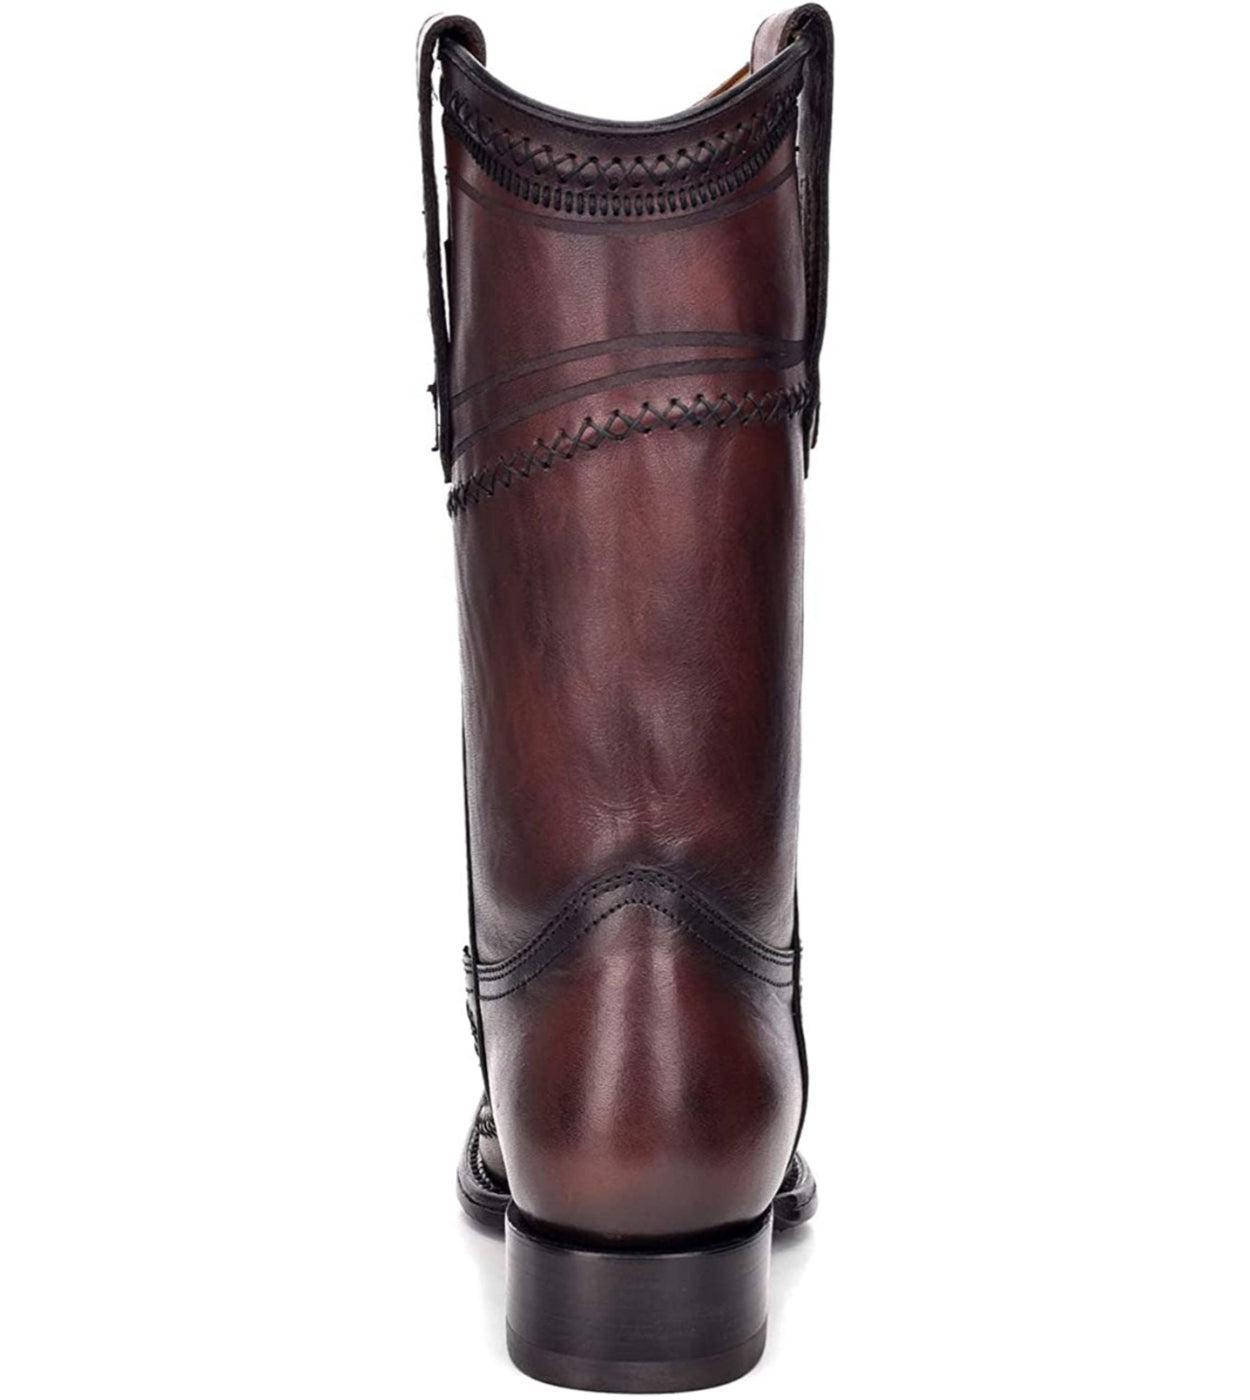 1B1AA1 - Cuadra blackcherry casual cowboy ostrich leather boots for men-Kuet.us